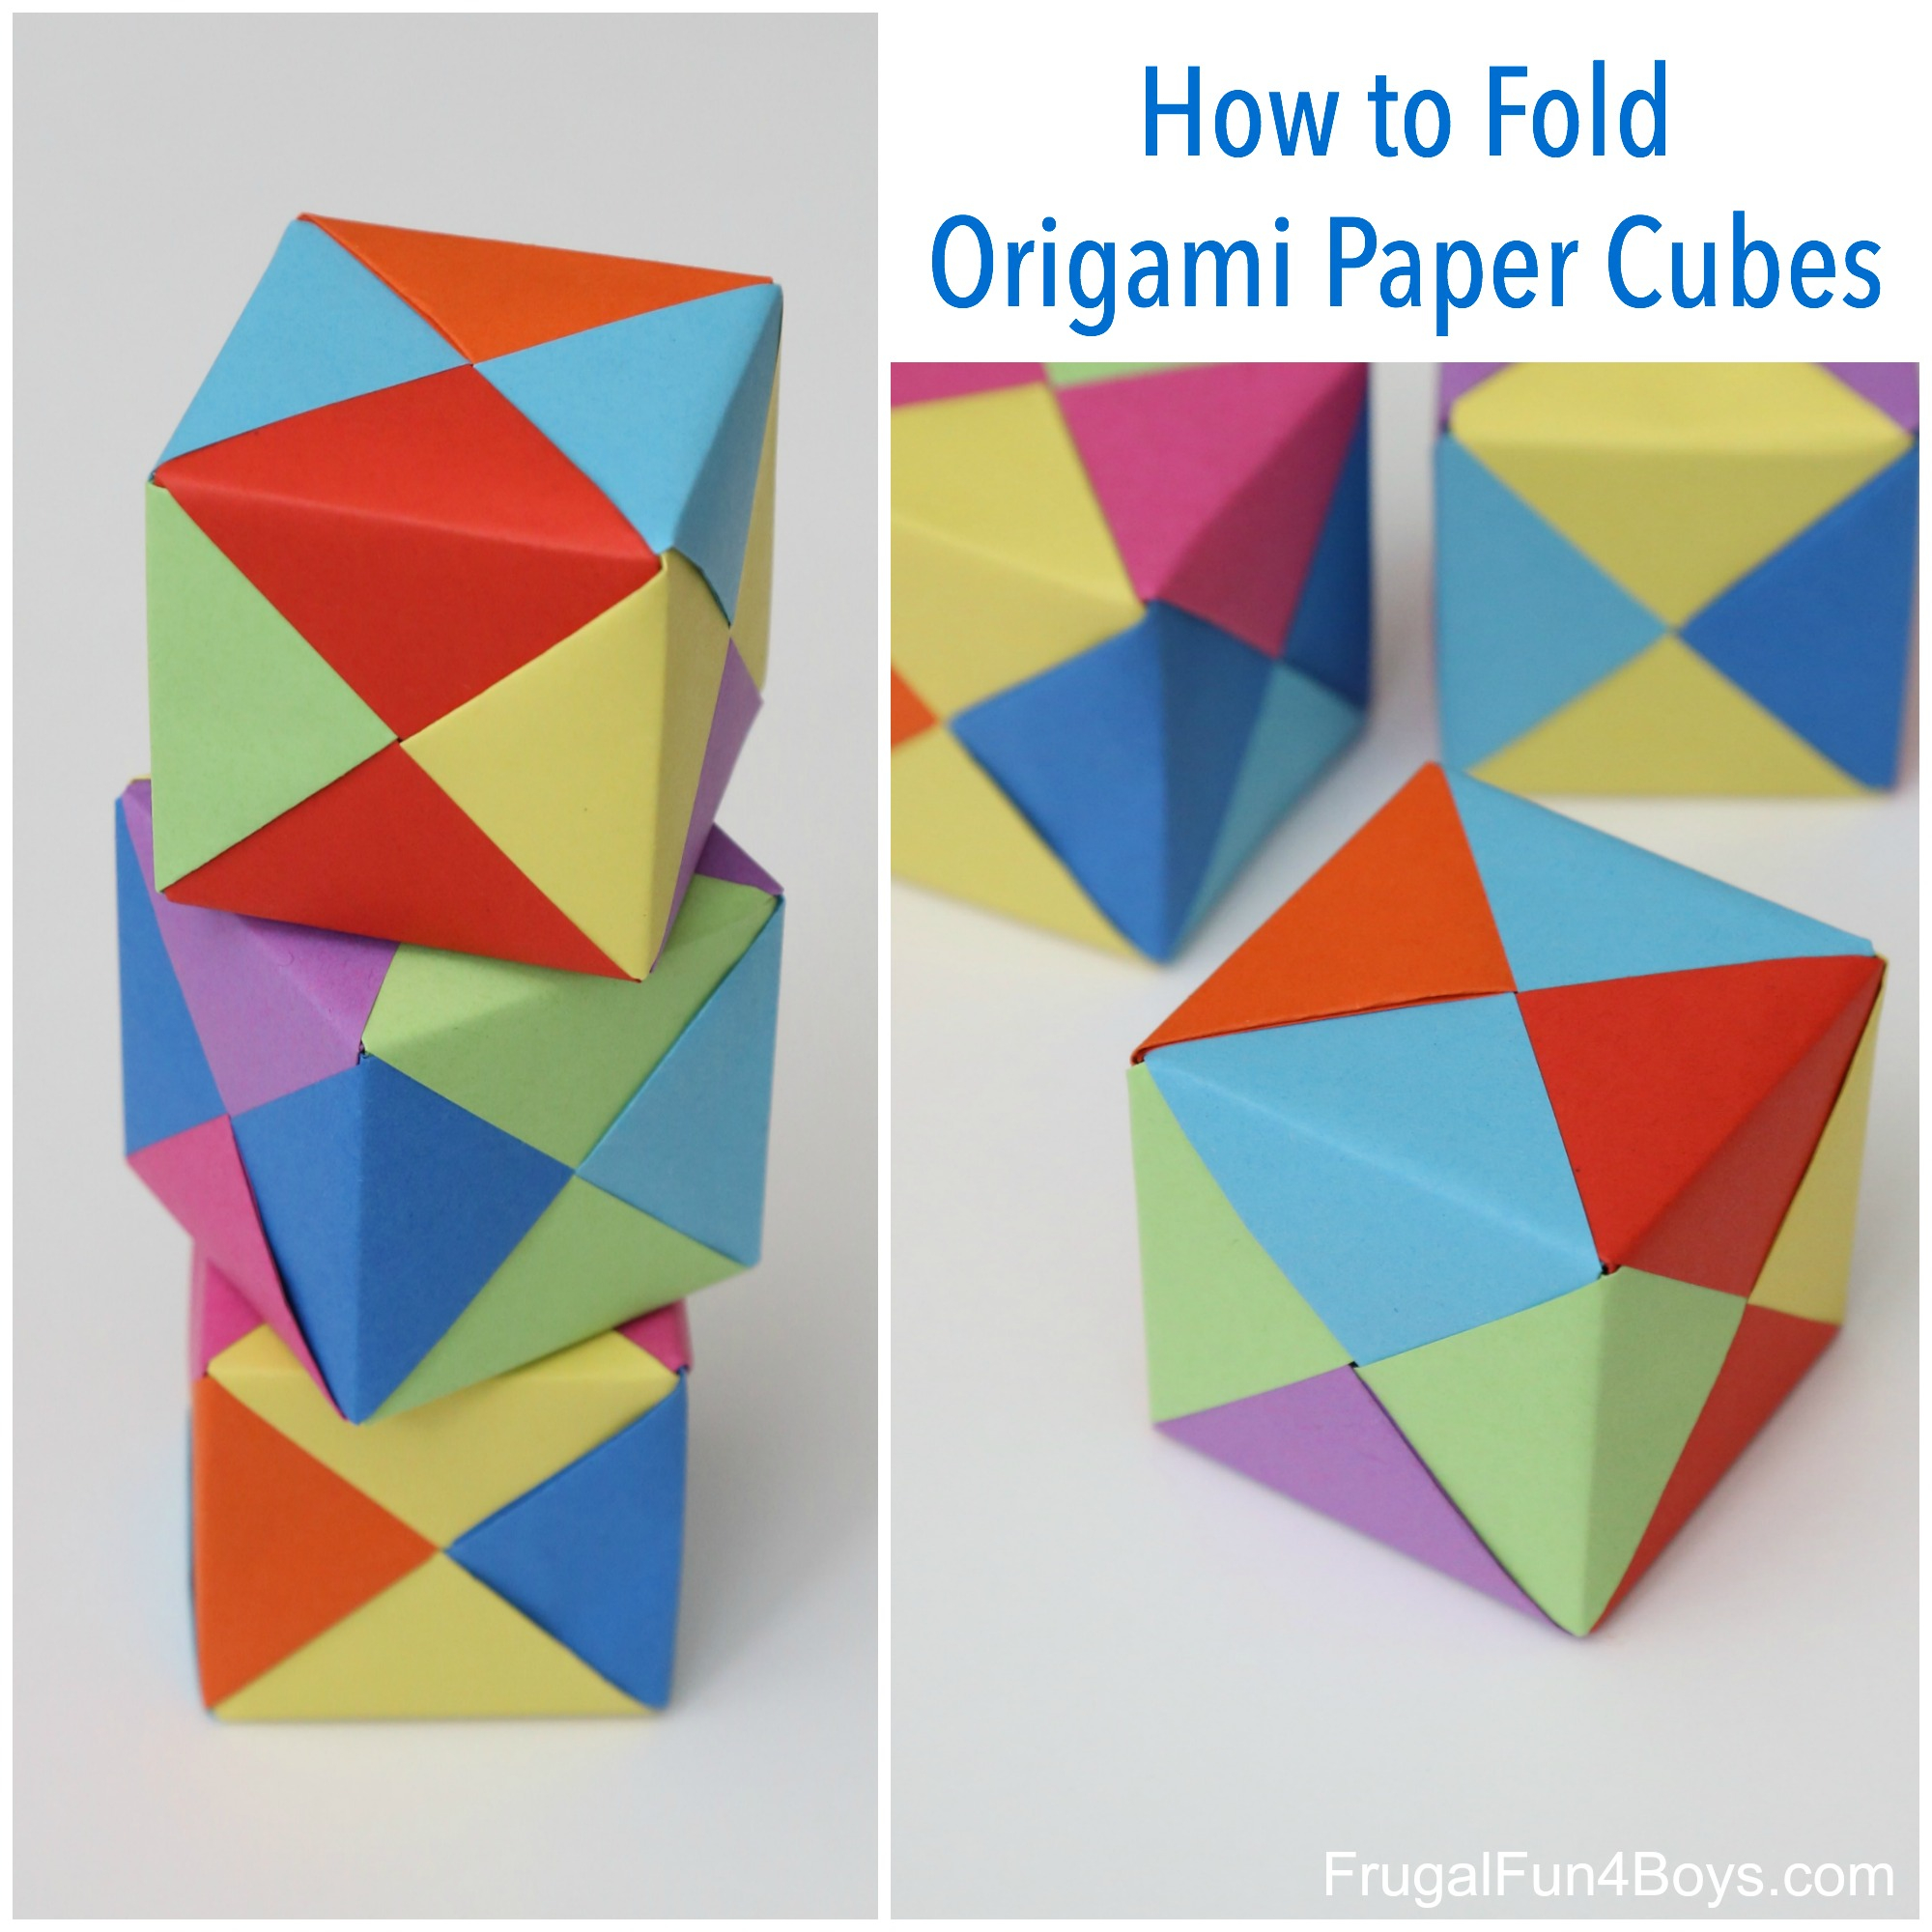 How To Do A Origami Box How To Fold Origami Paper Cubes Frugal Fun For Boys And Girls